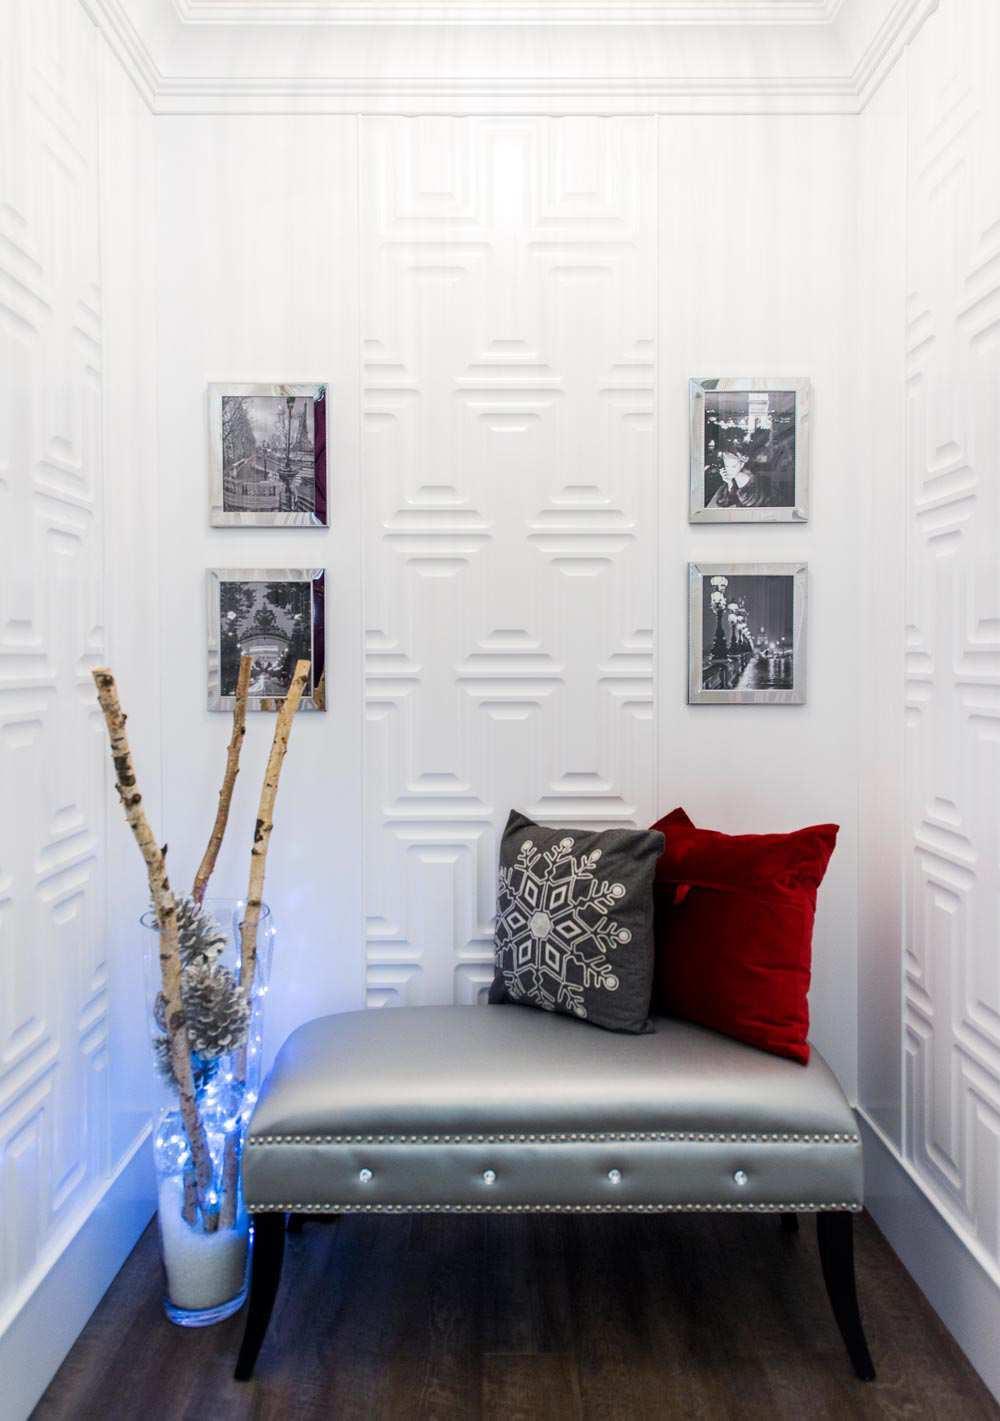 LE PETIT PARIS: Studio J designer Josee Lapalme s room, shown above, is all about the details with textured wall panels offset by a comfortable silver bench and glass and crystal